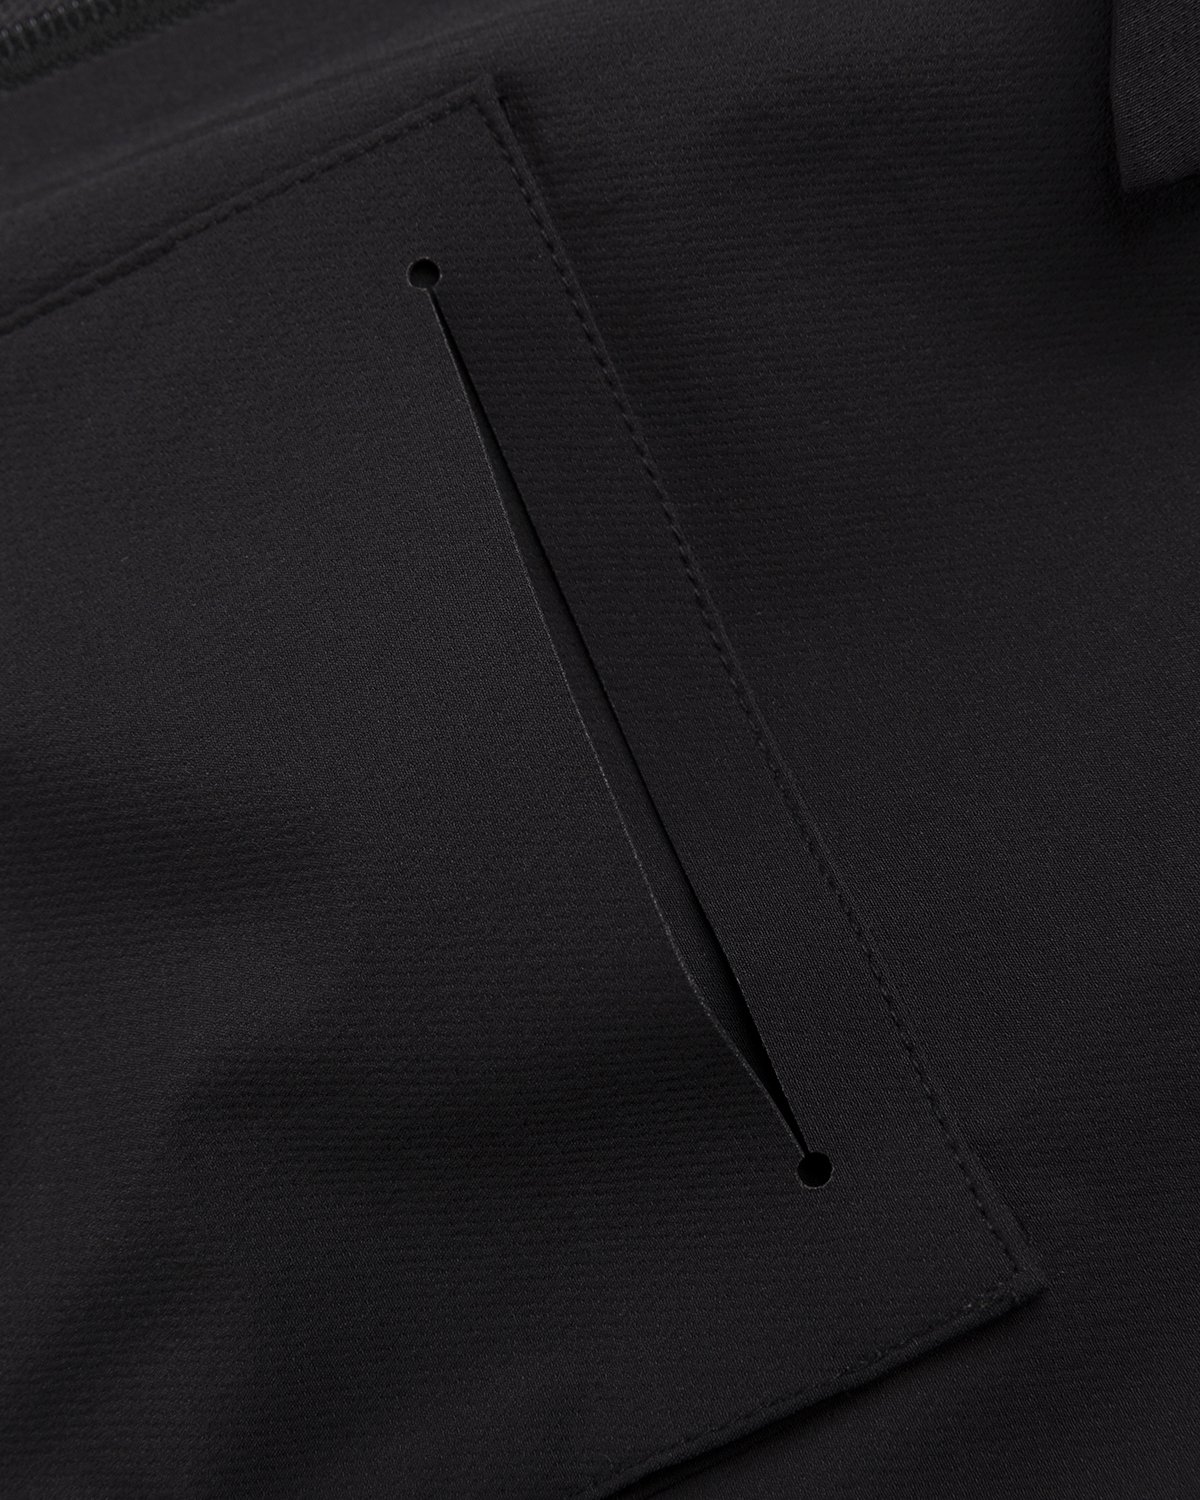 A-Cold-Wall* - Technical Overshirt Black - Clothing - Black - Image 6